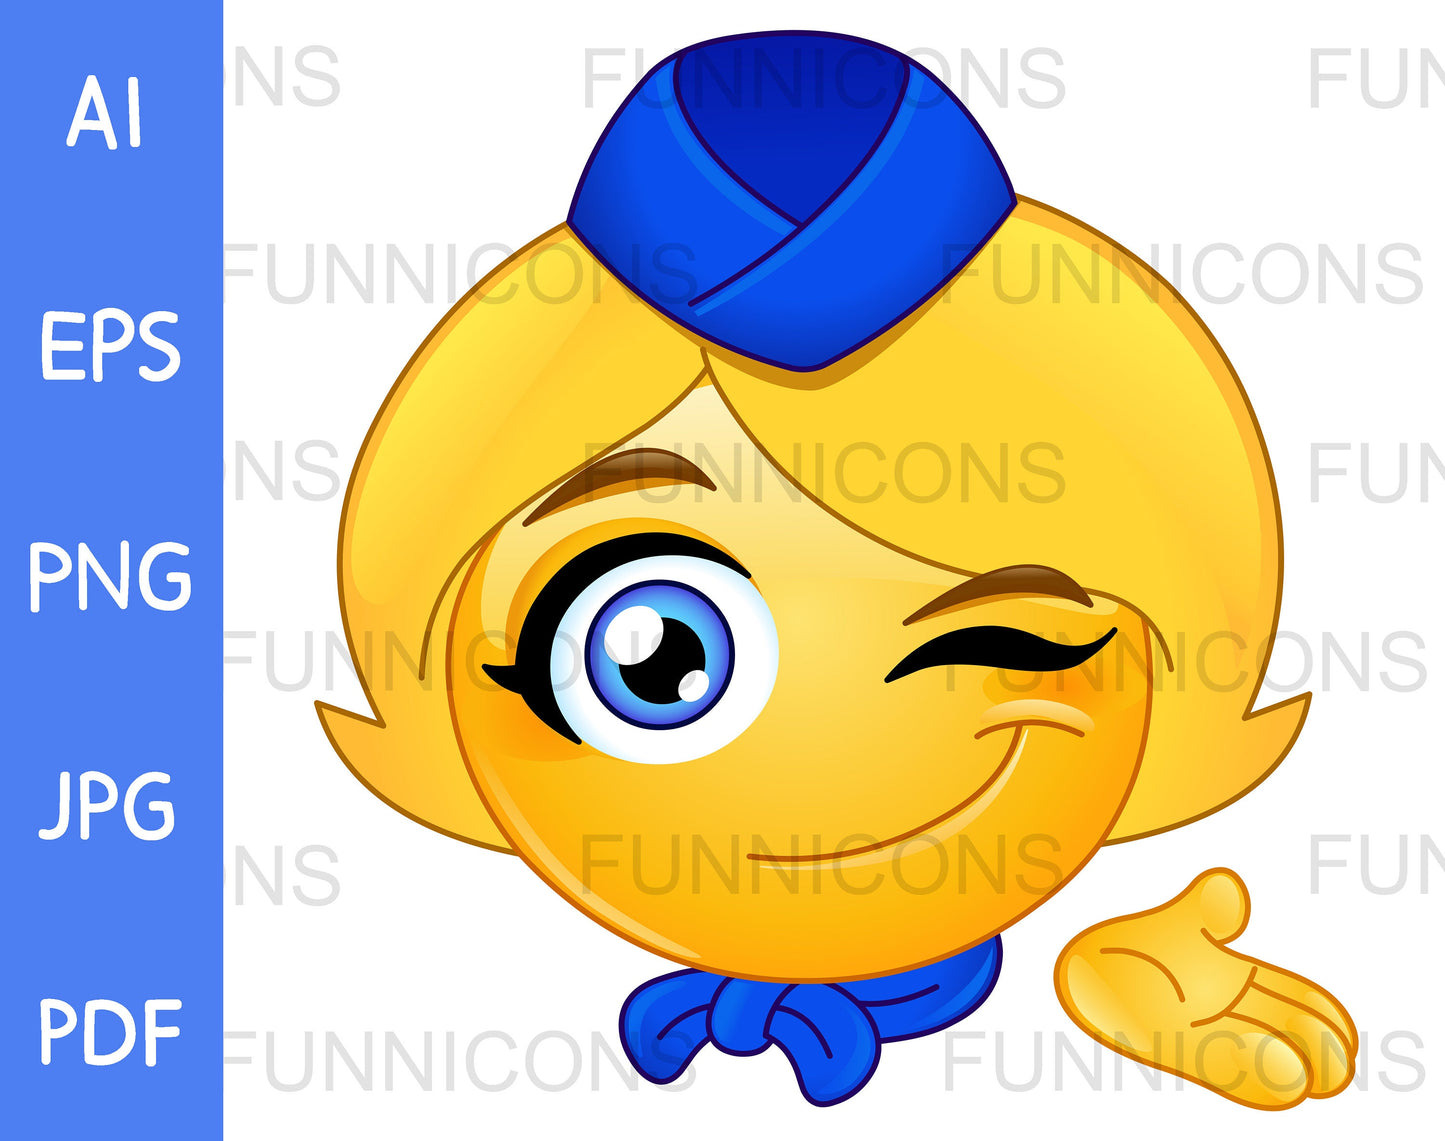 Smiling Stewardess Emoji Winking and Presenting with her Hand